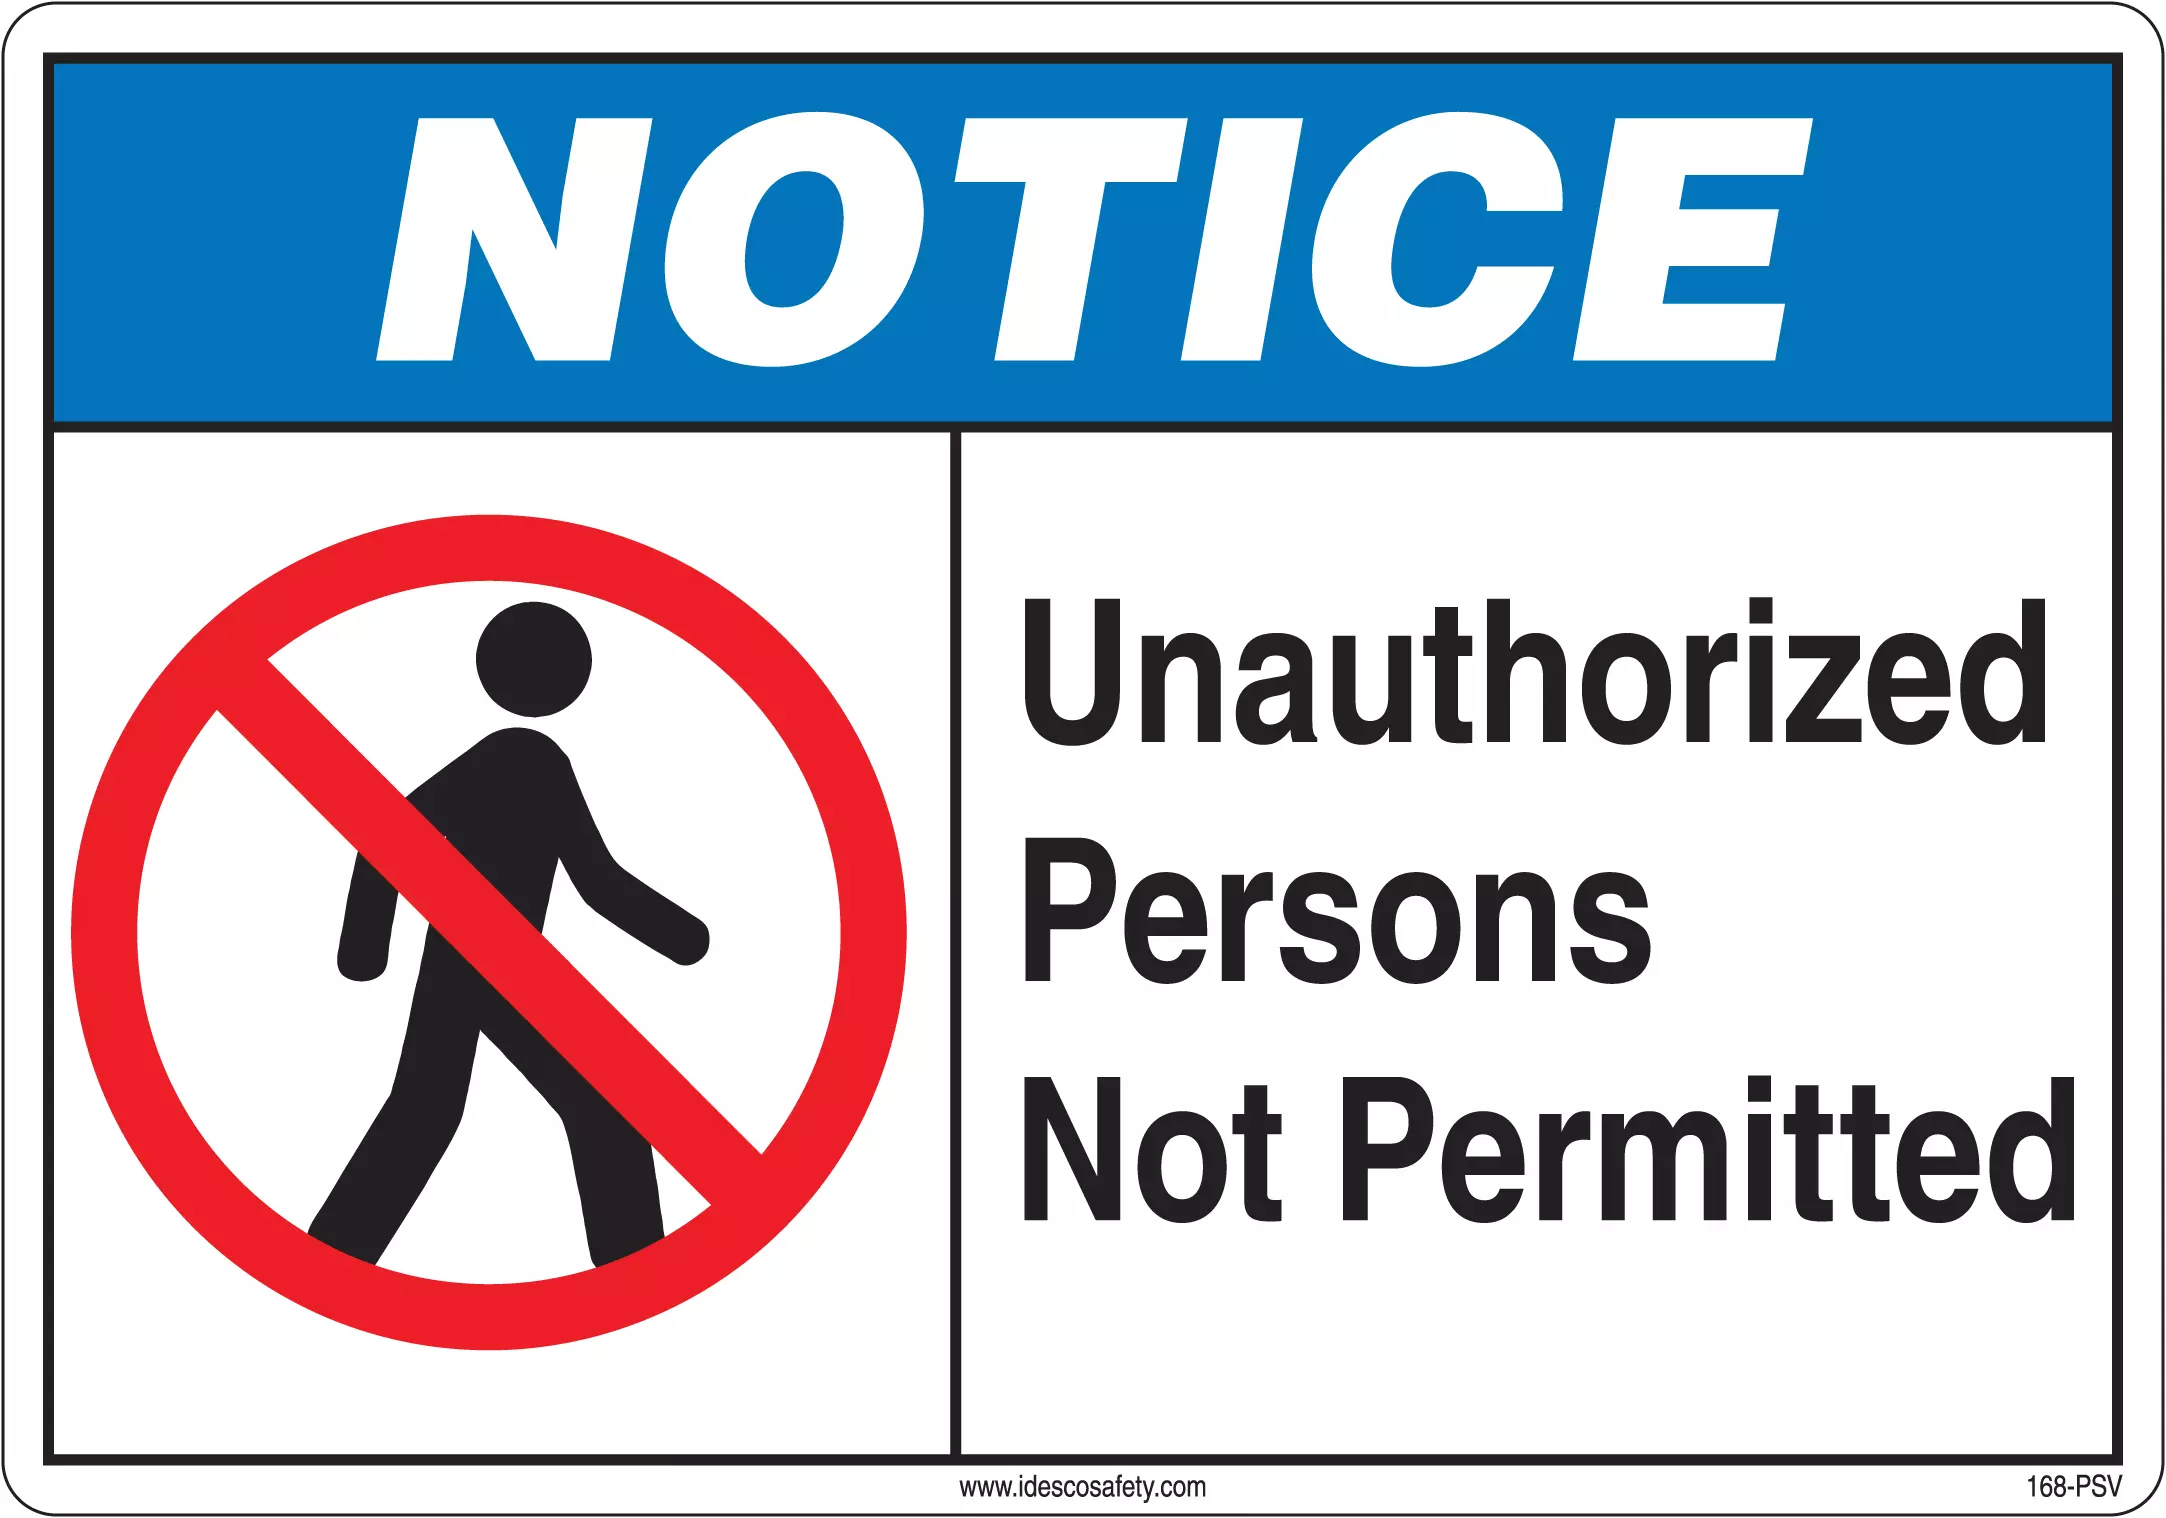 Unauthorized перевод. Signs and Notices. Notice табличка. Unauthorized persons not permitted. The language of signs and Notices.